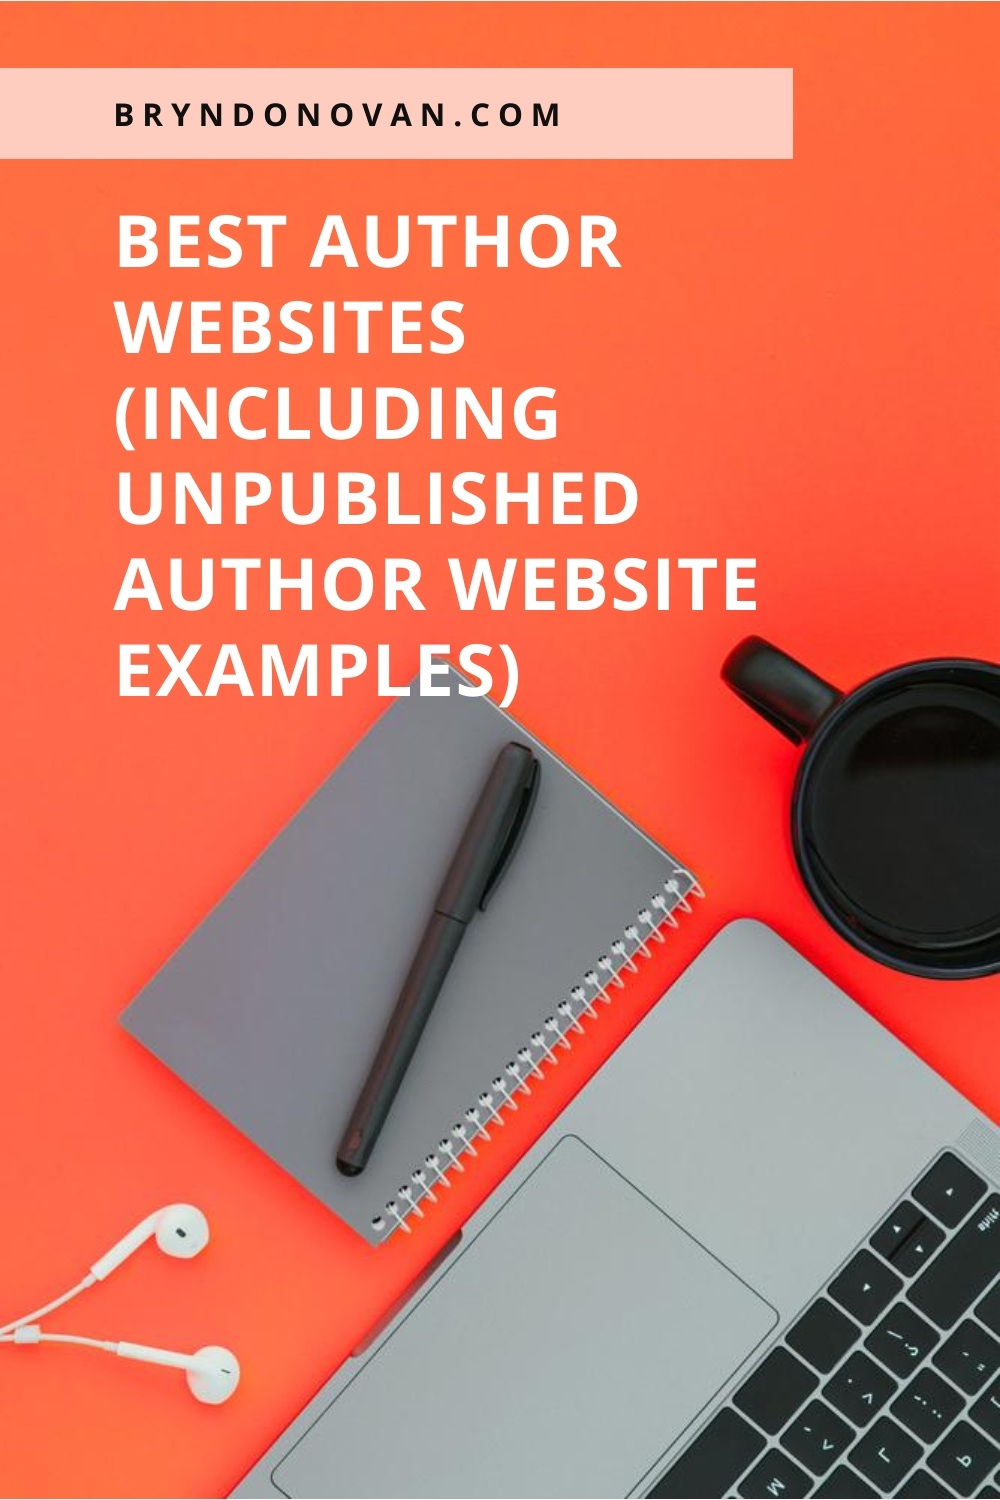 computer, coffee | Best Author Websites (Including Unpublished Author Website Examples) #awesome author websites #best author blogs #best author websites #best website hosting for writers #great author websites #writers websites examples